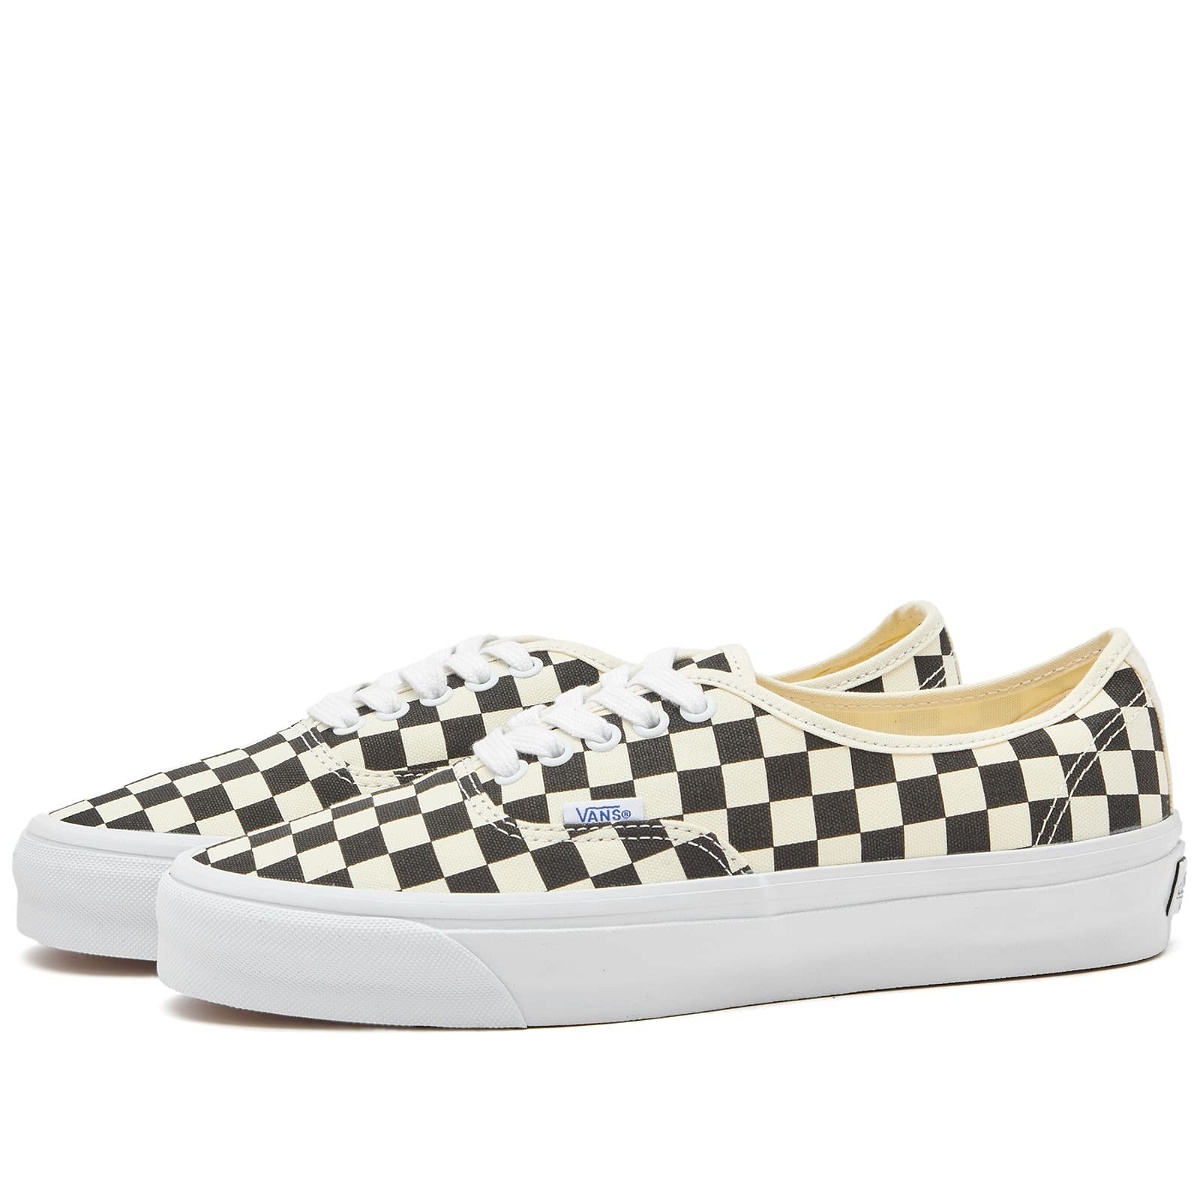 Photo: Vans Men's Authentic Reissue 44 Sneakers in Lx Checkerboard Black/Off White